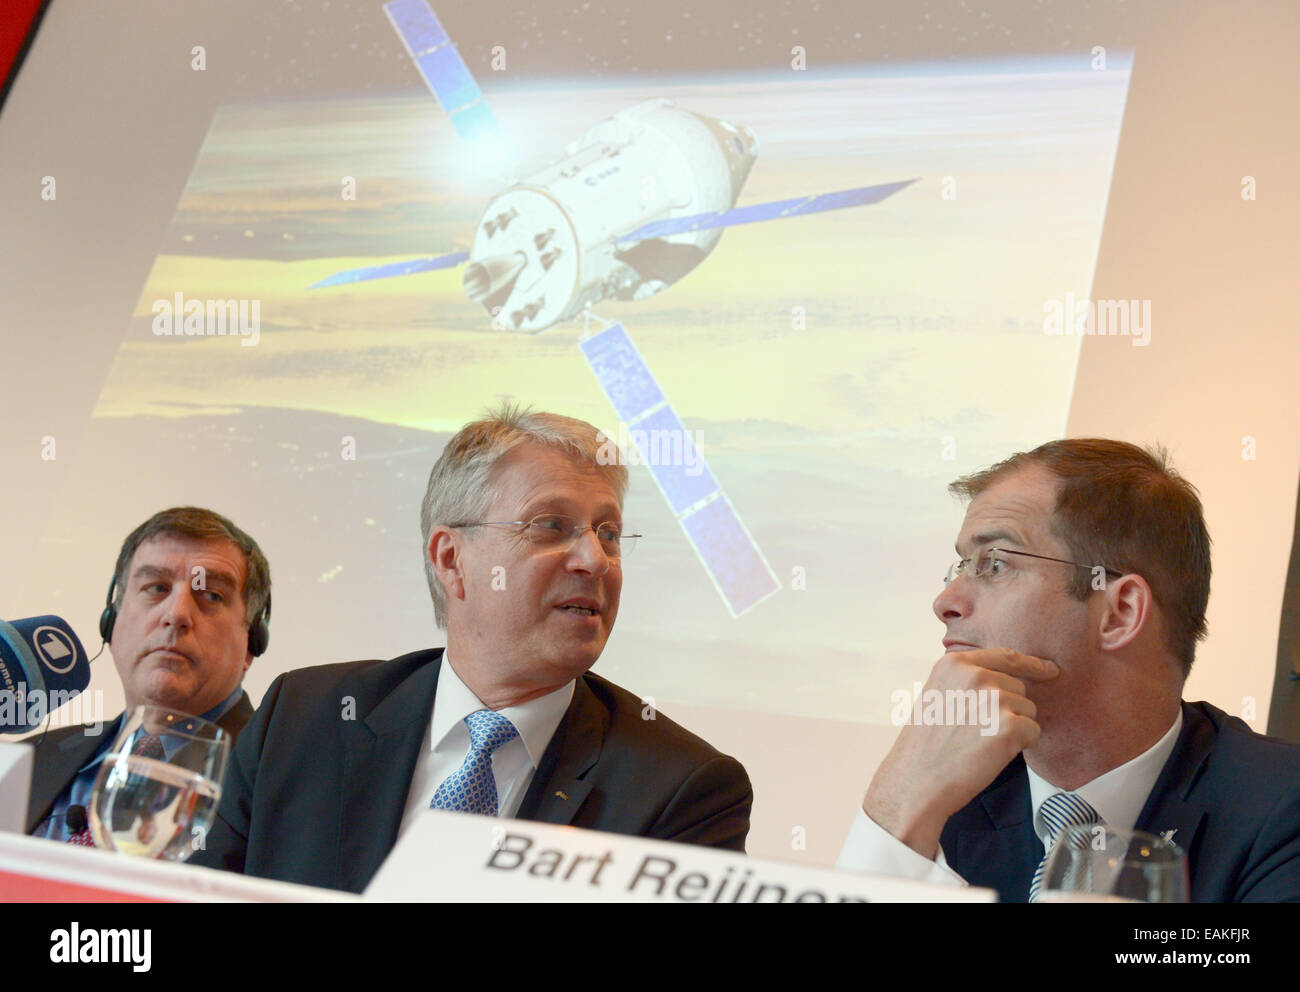 Berlin, Germany. 17th Nov, 2014. Bart Reijnen (R-L), site director of Airbus Defence and Space Bremen, Thomas Reiter, leader of Human Spaceflight and Operations at the European Space Agency (ESA), and NASA deputy director of the Johnson Space Center, Kirk Shireman, at a press conference for a contract signing in Berlin, Germany, 17 November 2014. With the 390-million Euro contract, Europe will deliver critical elements for an American space travel project. Airbus will develop a module for the American space capsule, Orion. Photo: RAINER JENSEN/dpa/Alamy Live News Stock Photo